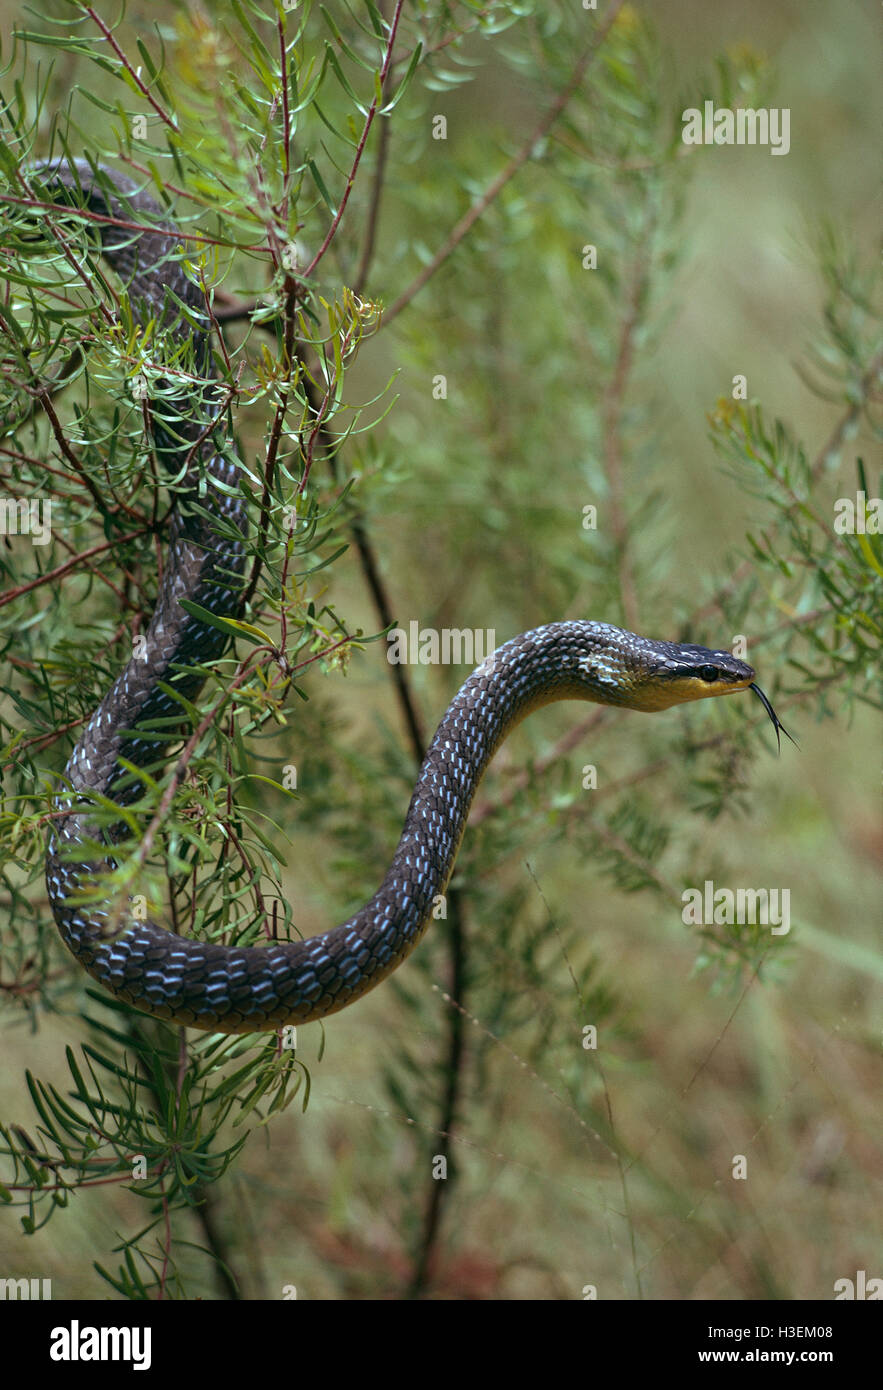 Green tree snake (Dendrelaphis punctulata), in bush with forked tongue extended. North Queensland, Australia Stock Photo